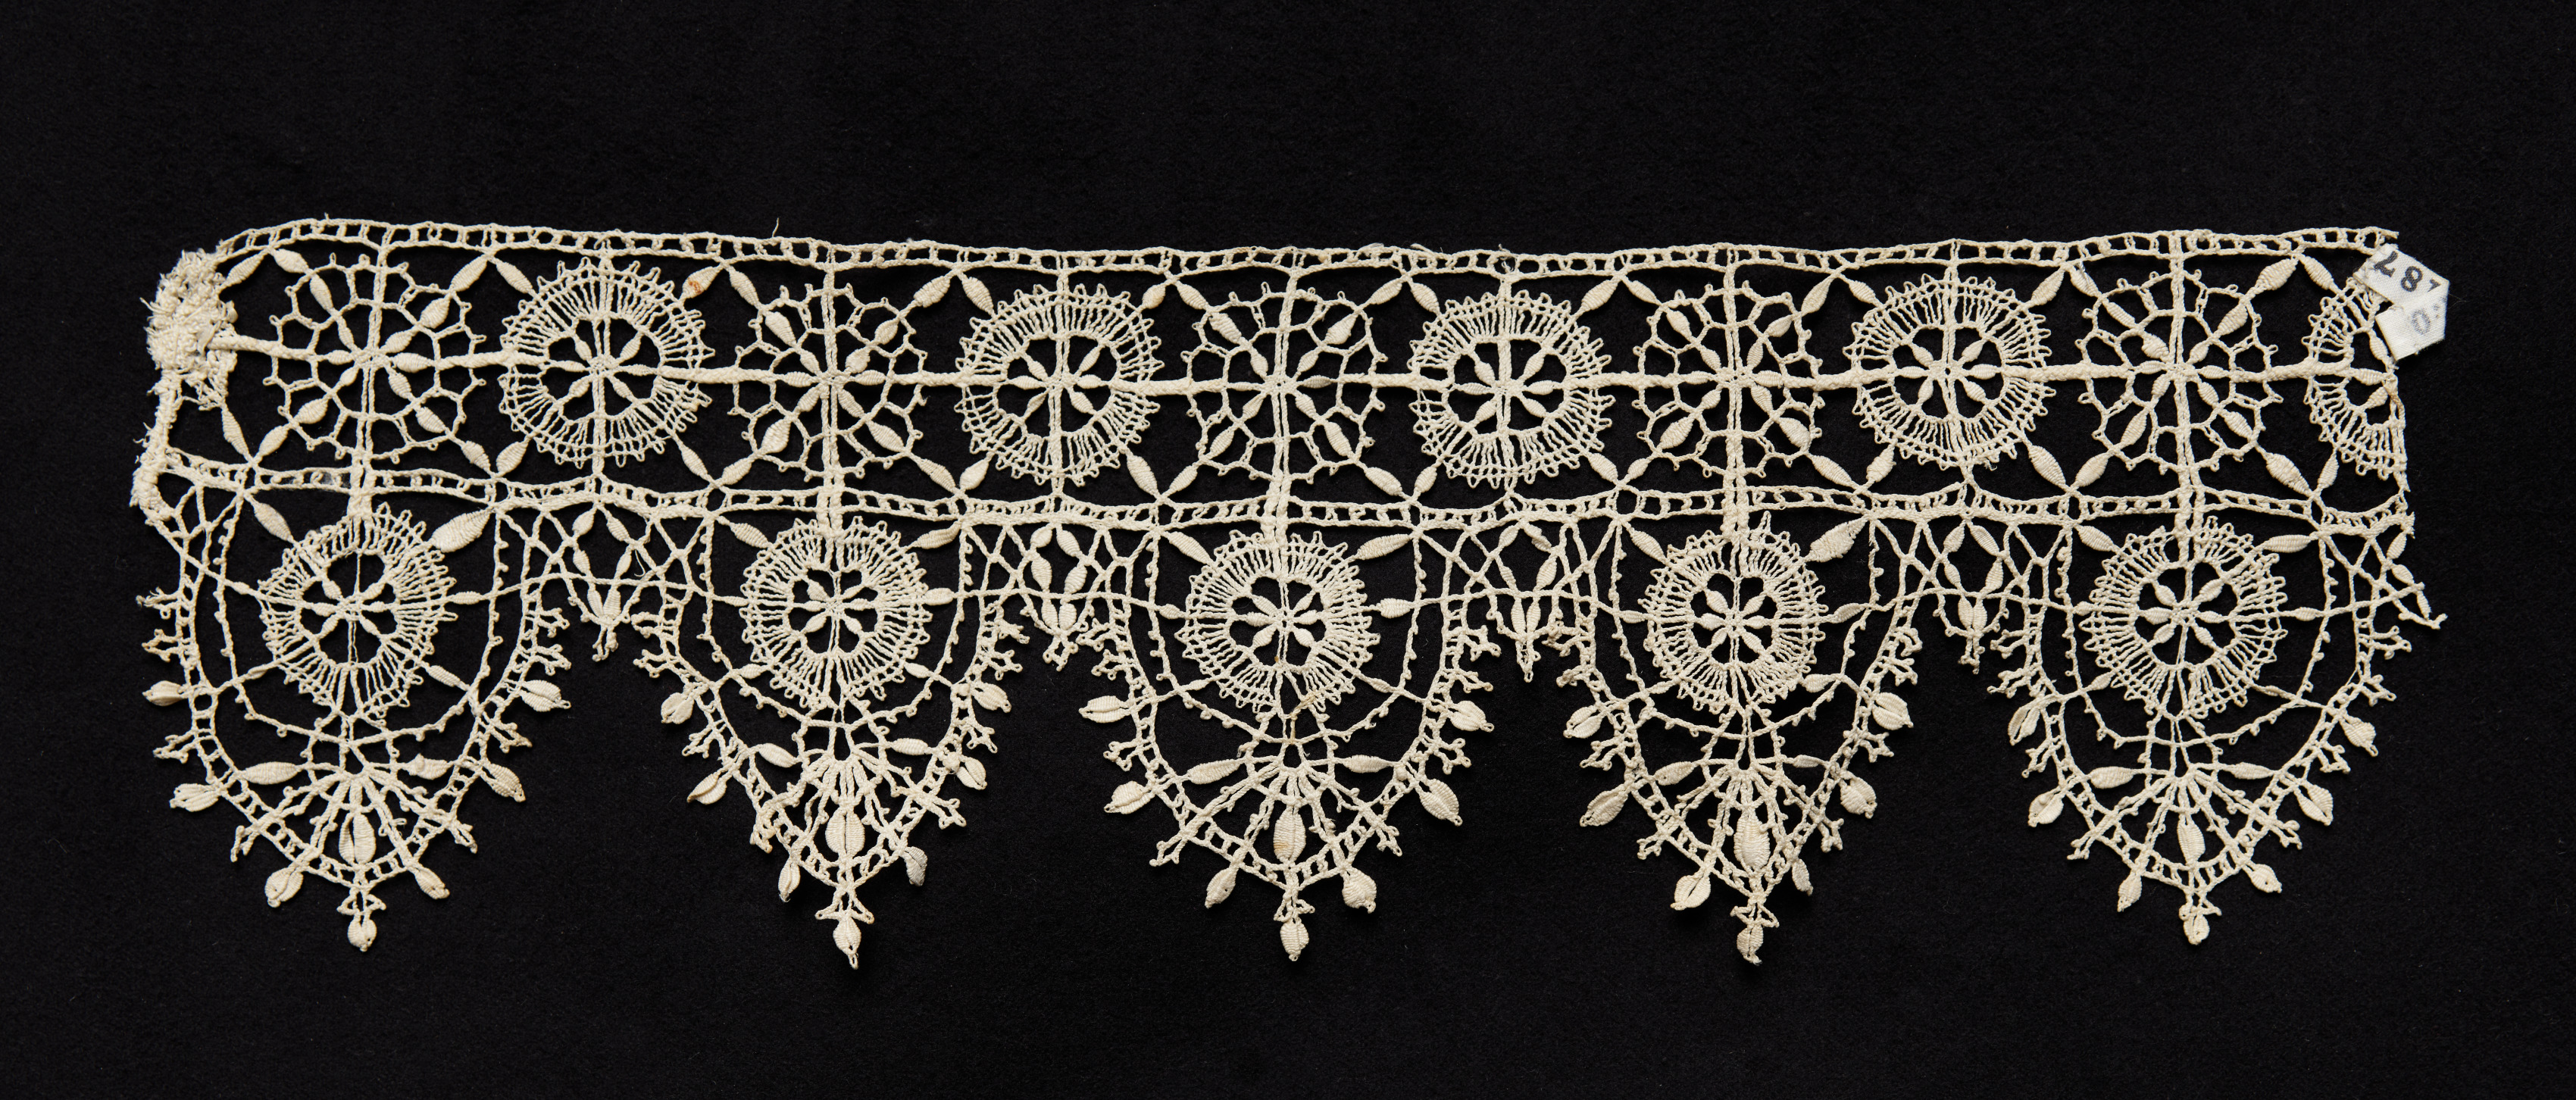 Bobbin Lace (Needlepoint Design) Insertion and Edging of Points